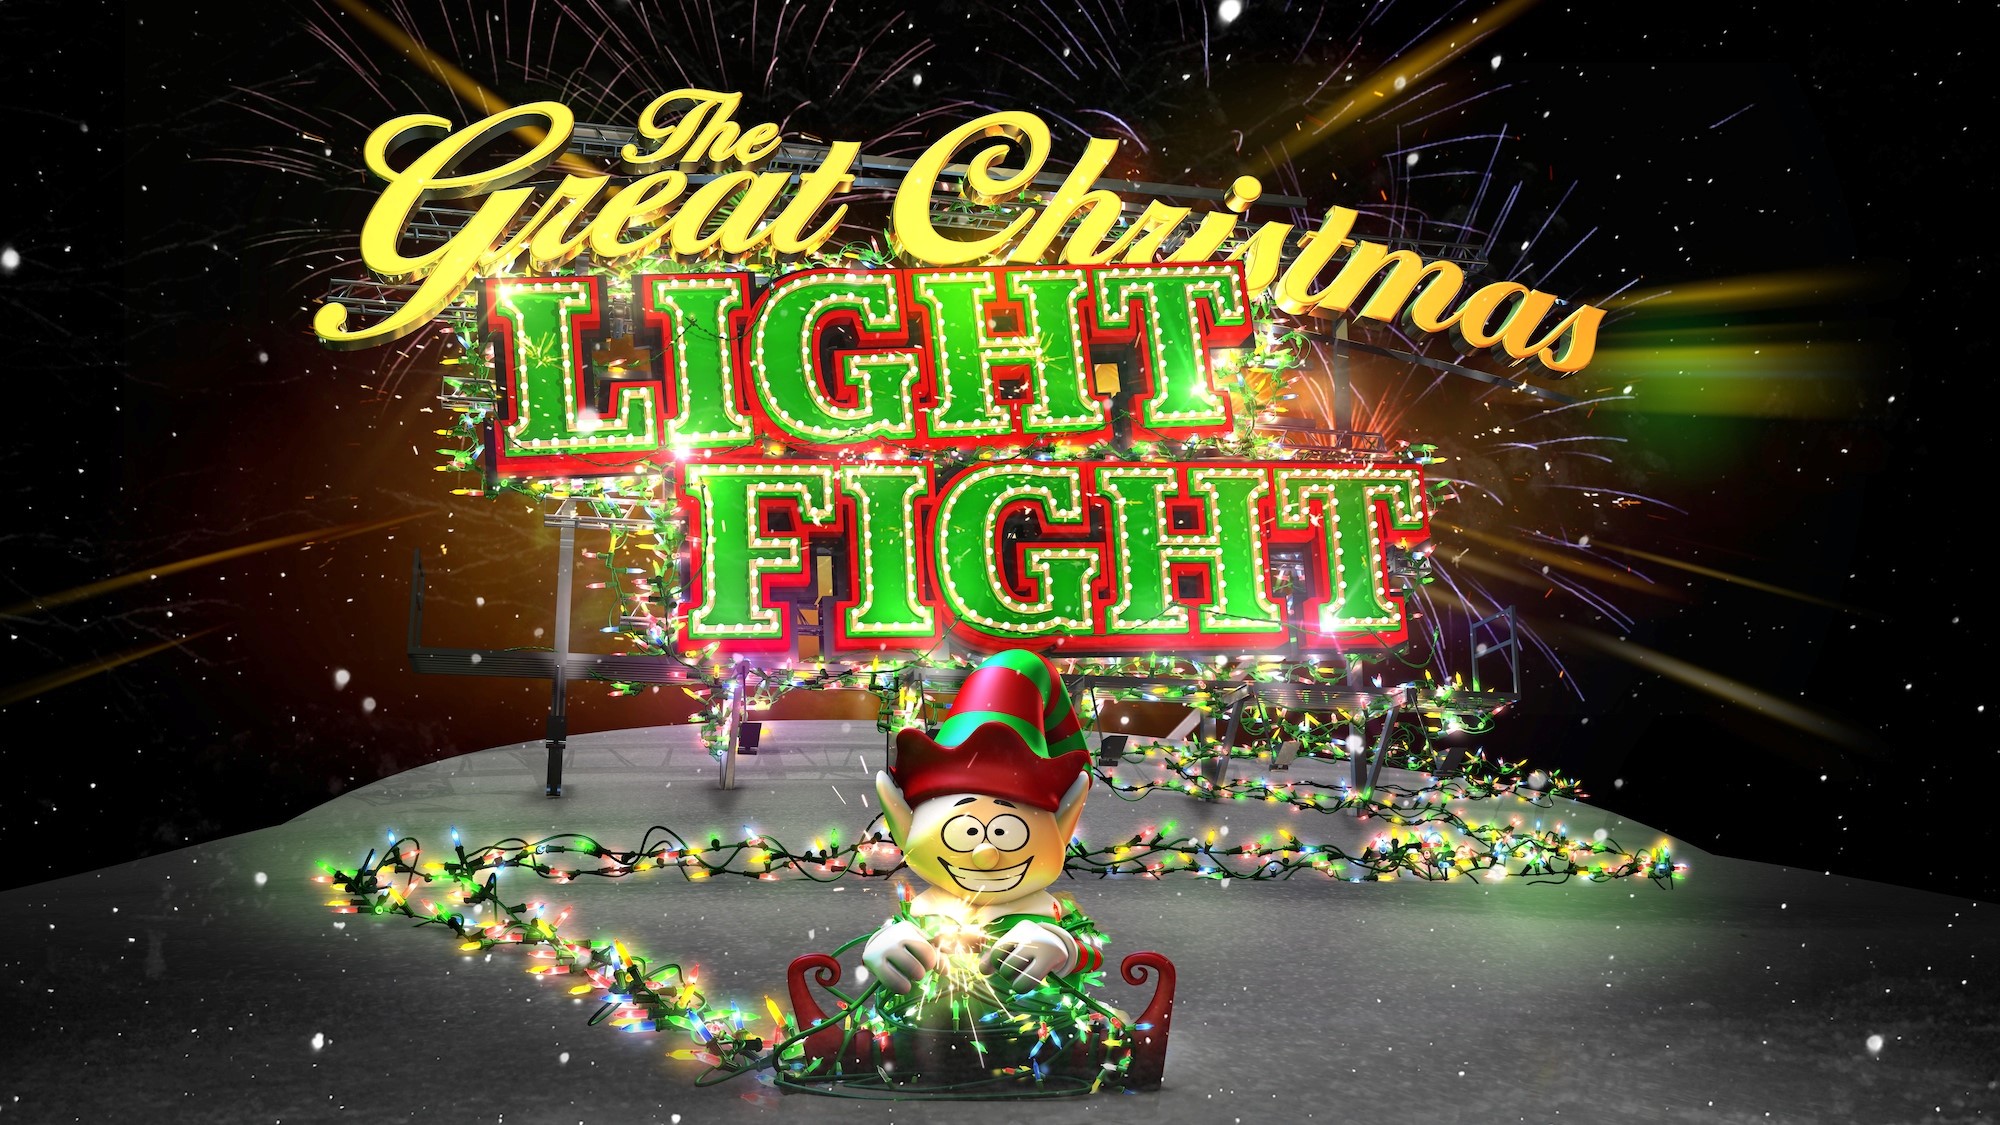 "The Great Christmas Light Fight" TV Show Returns